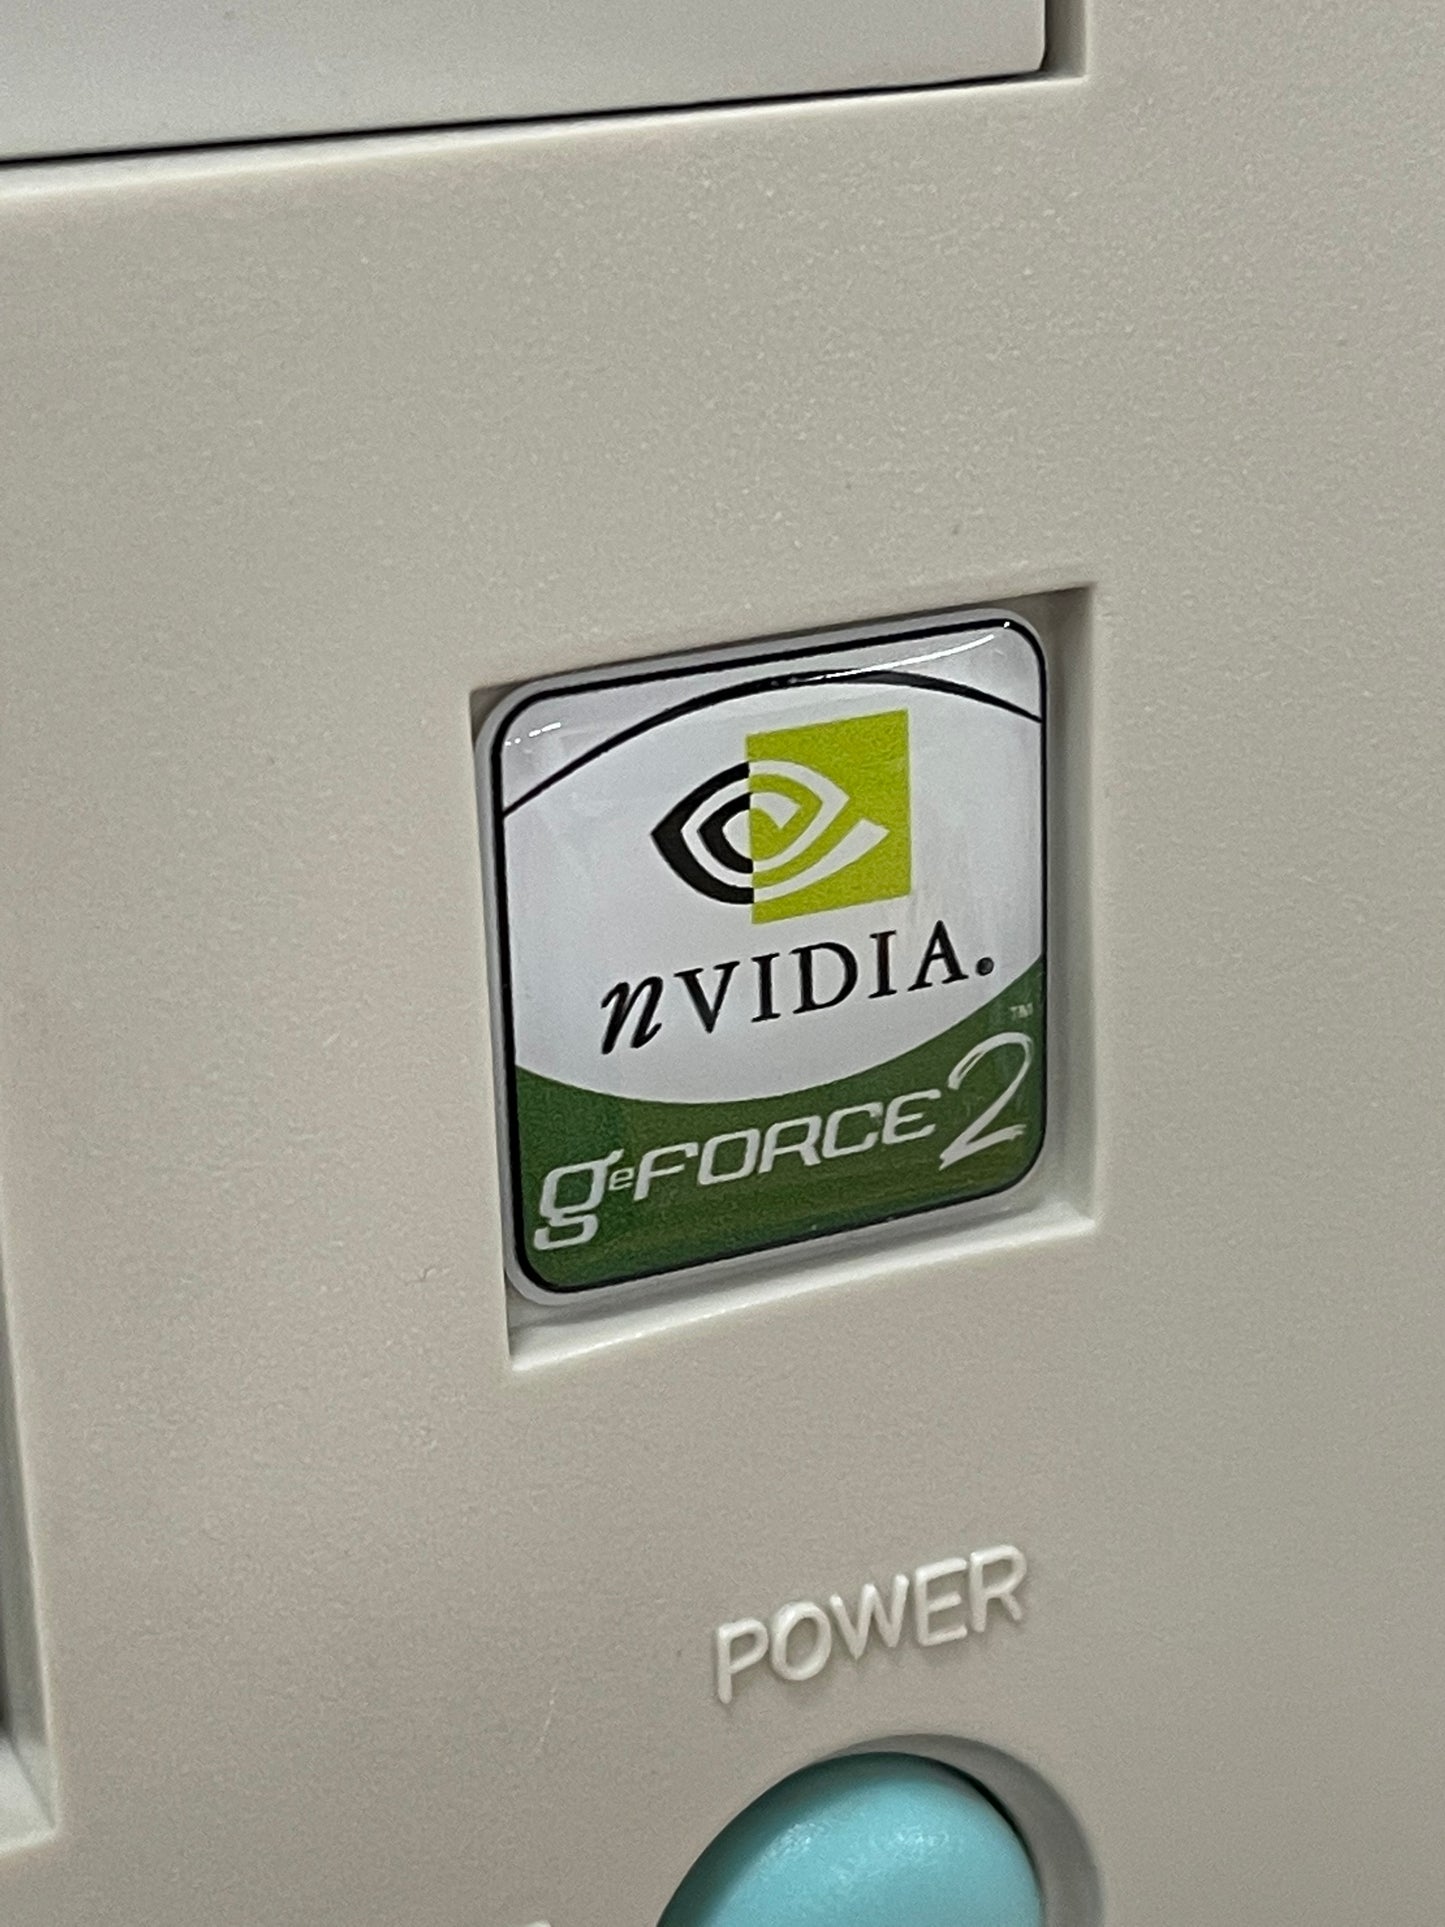 Nvidia Geforce2 General Video Graphics Case Badge Sticker - Dome